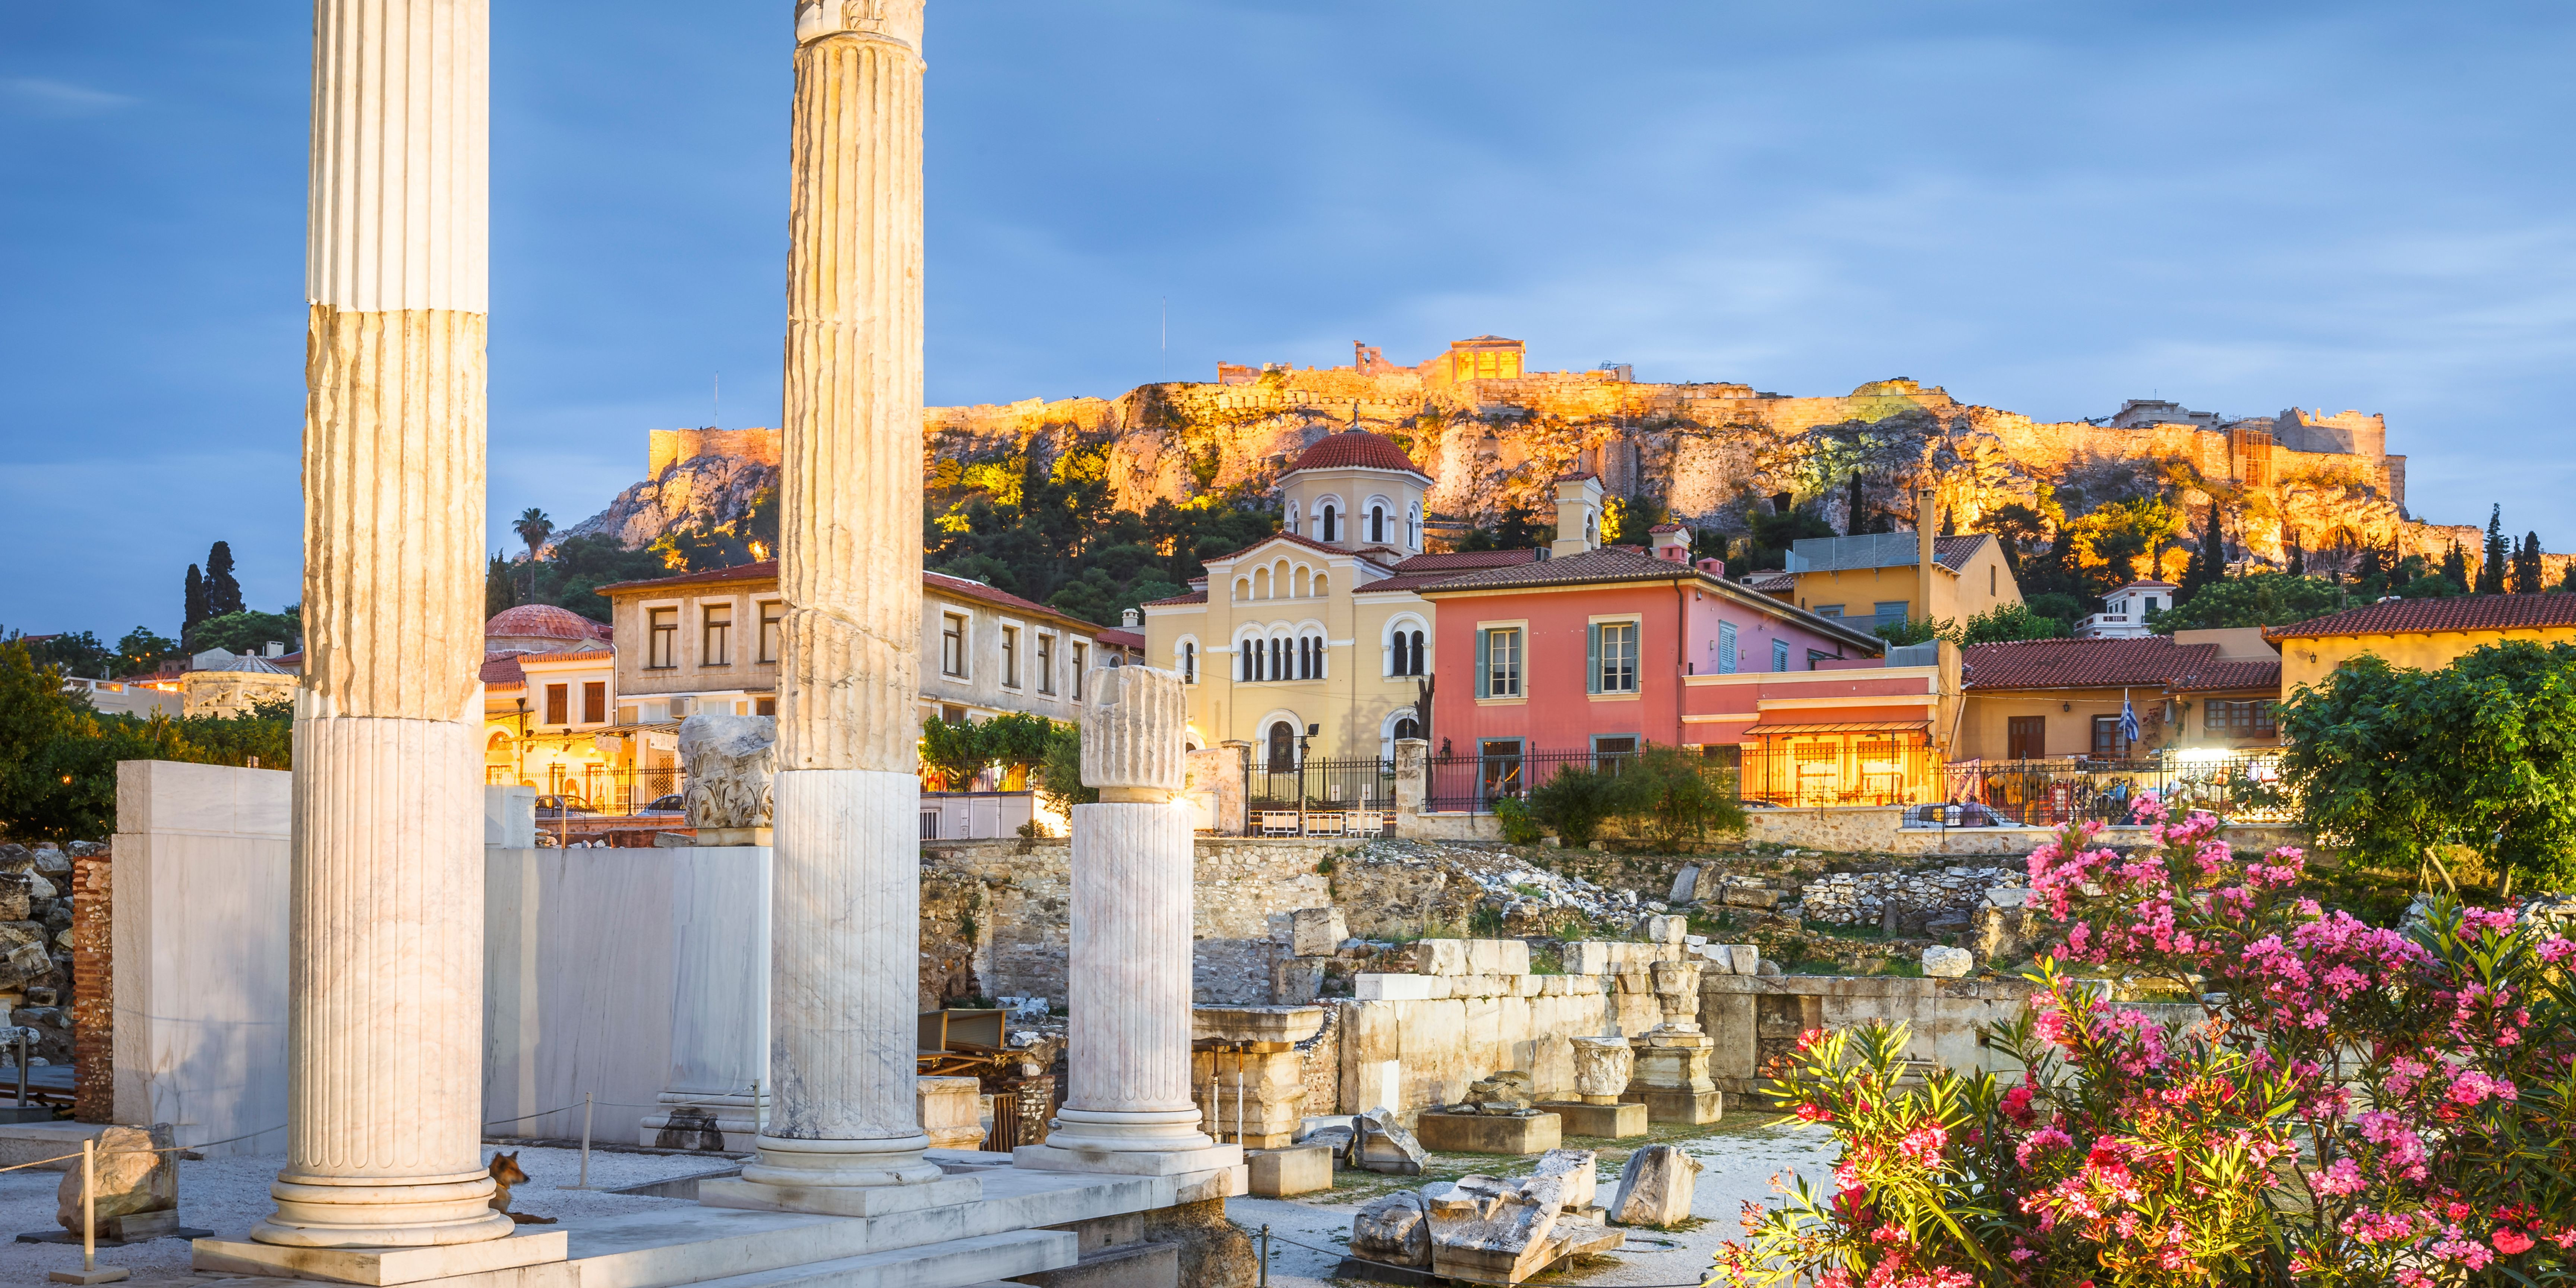 A view of Athens at dusk, featuring ancient columns in the foreground and the illuminated Acropolis on the hilltop in the background, with residential buildings and flowering shrubs.